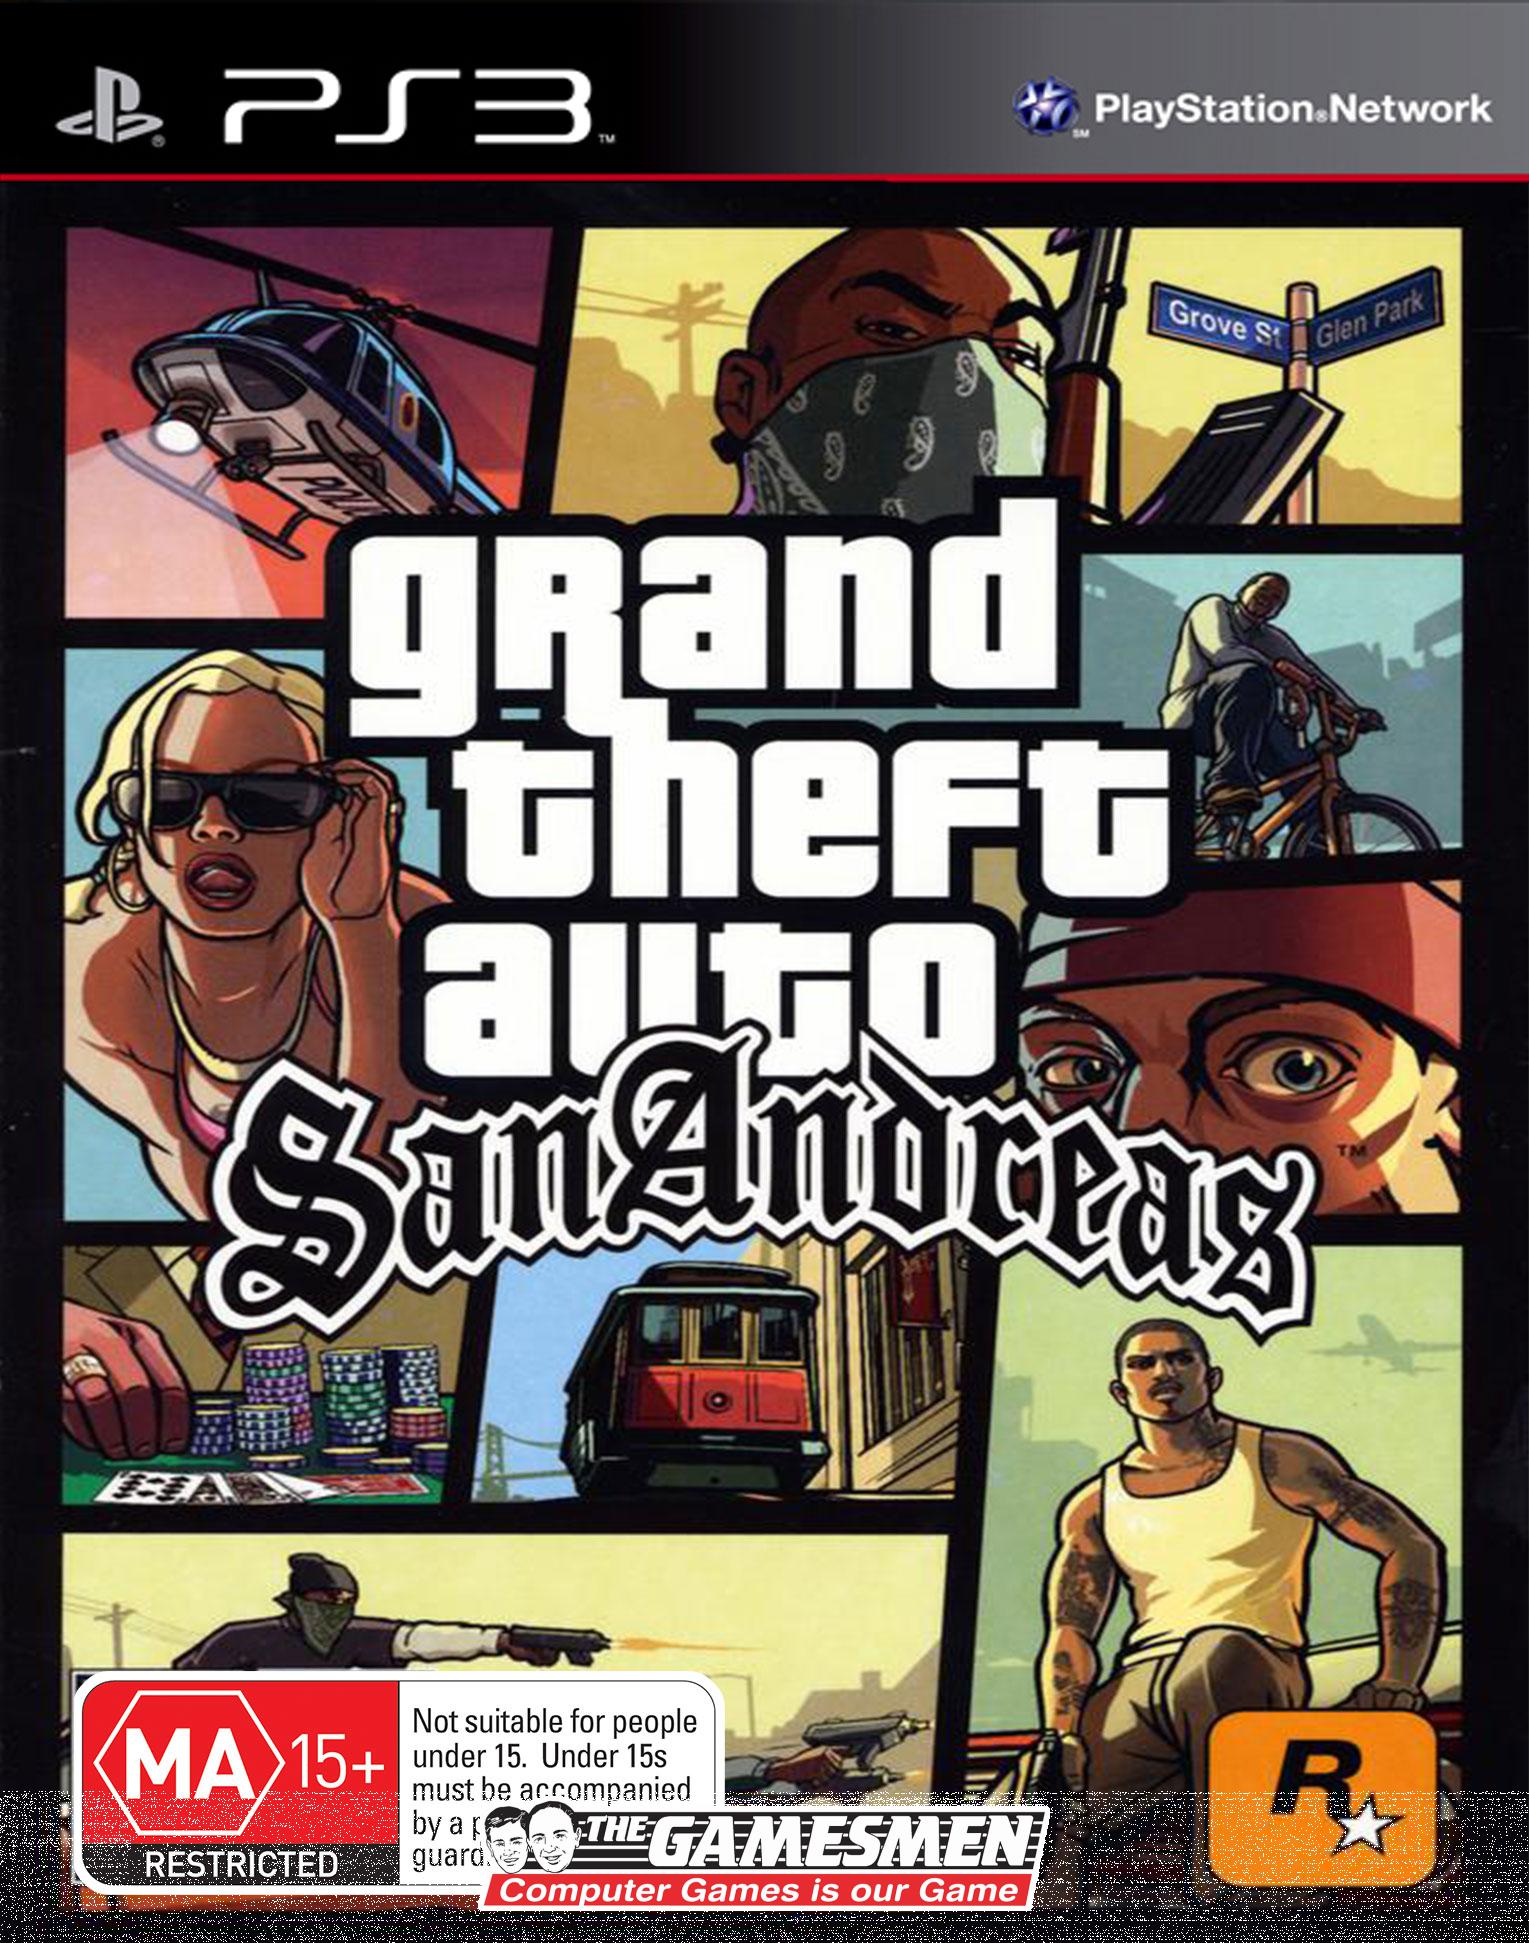 Gta san andreas english patch download free